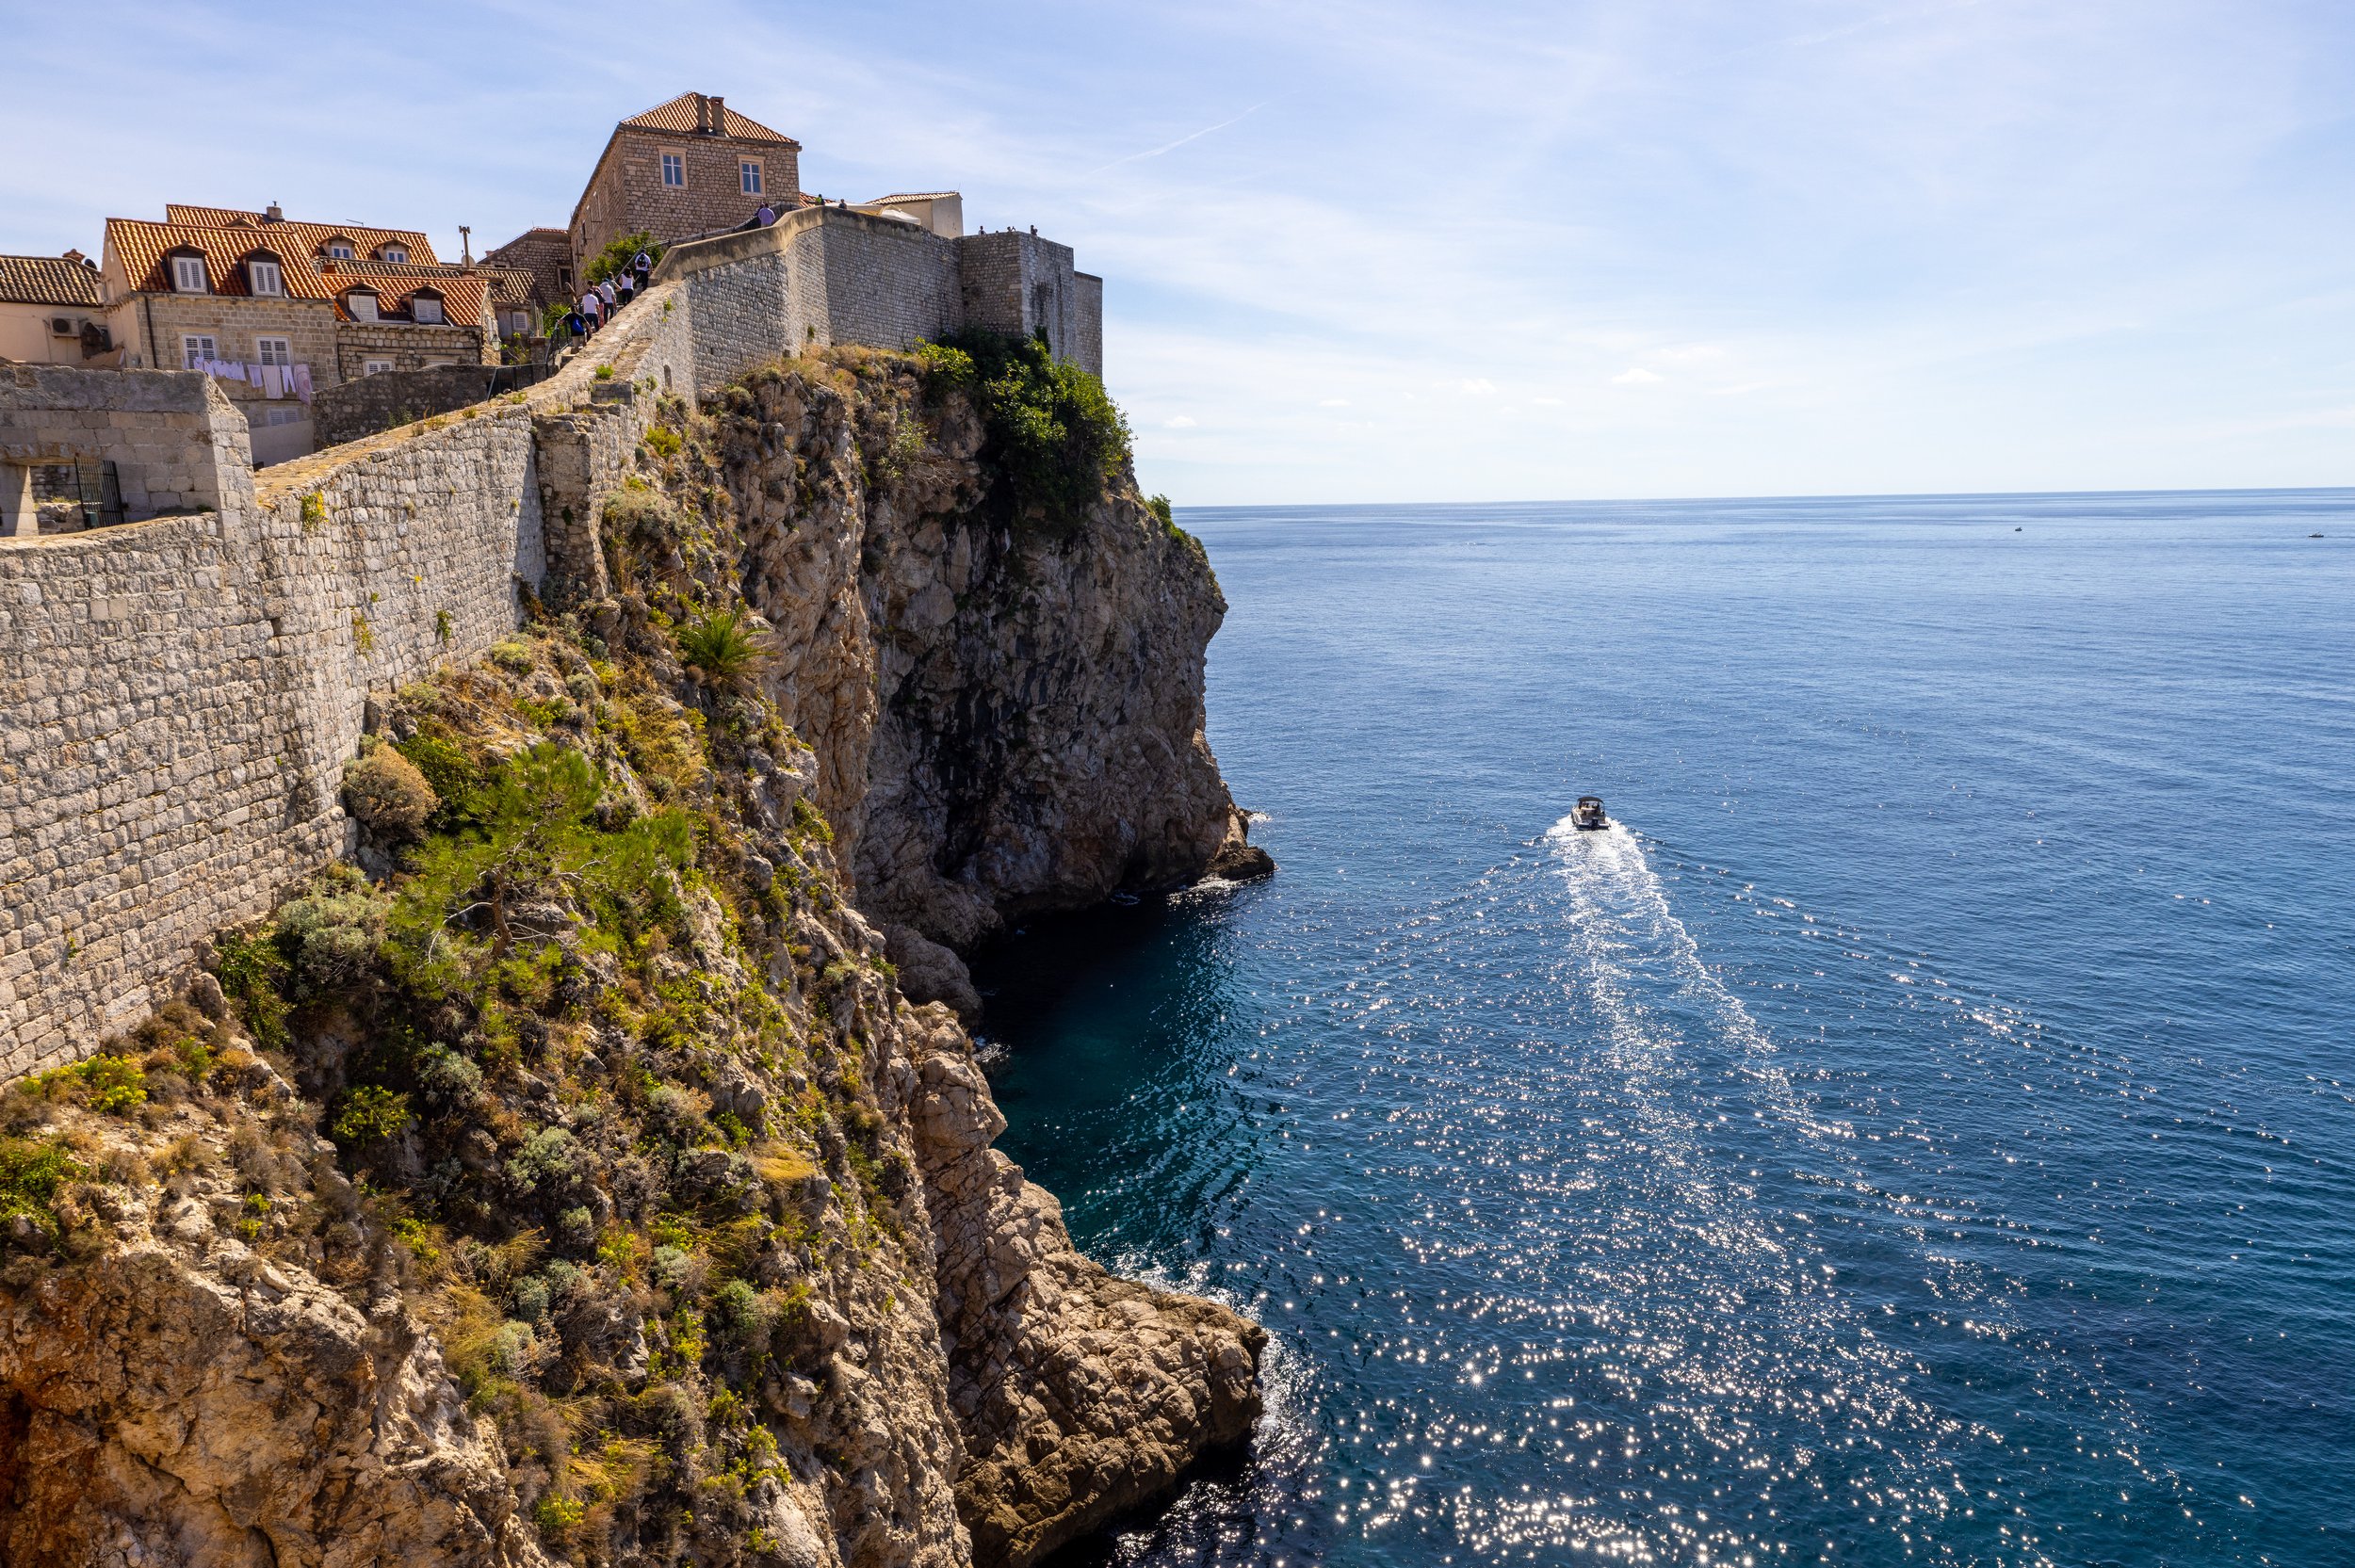 Dubrovnik Wall with Boat-0243.jpg